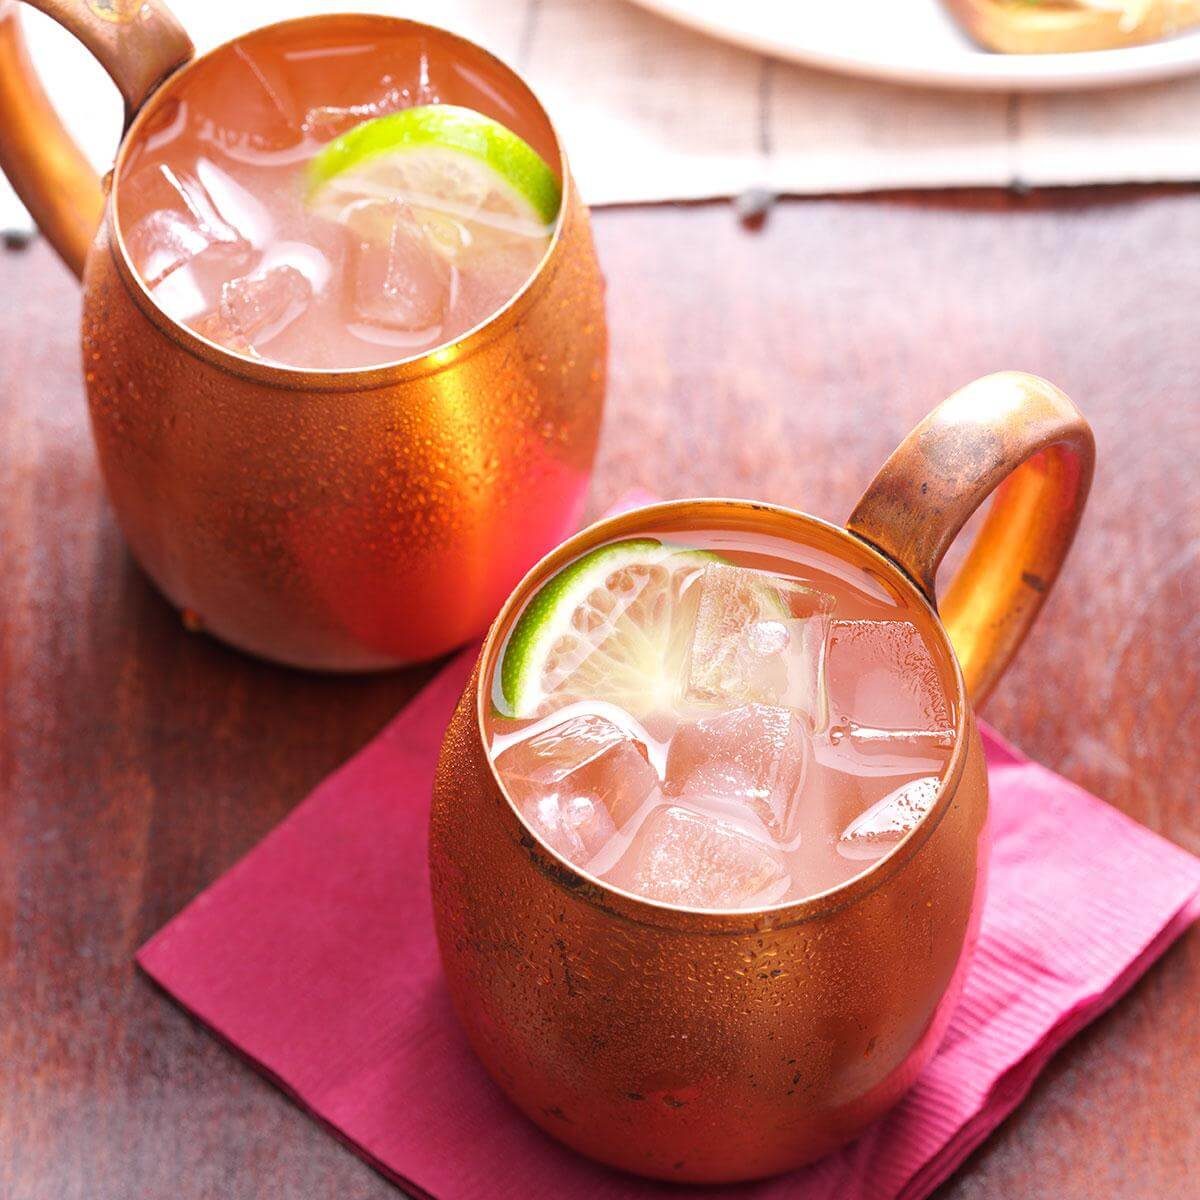 25 Easy Mixed Drinks That Taste Amazing - Sugar and Charm